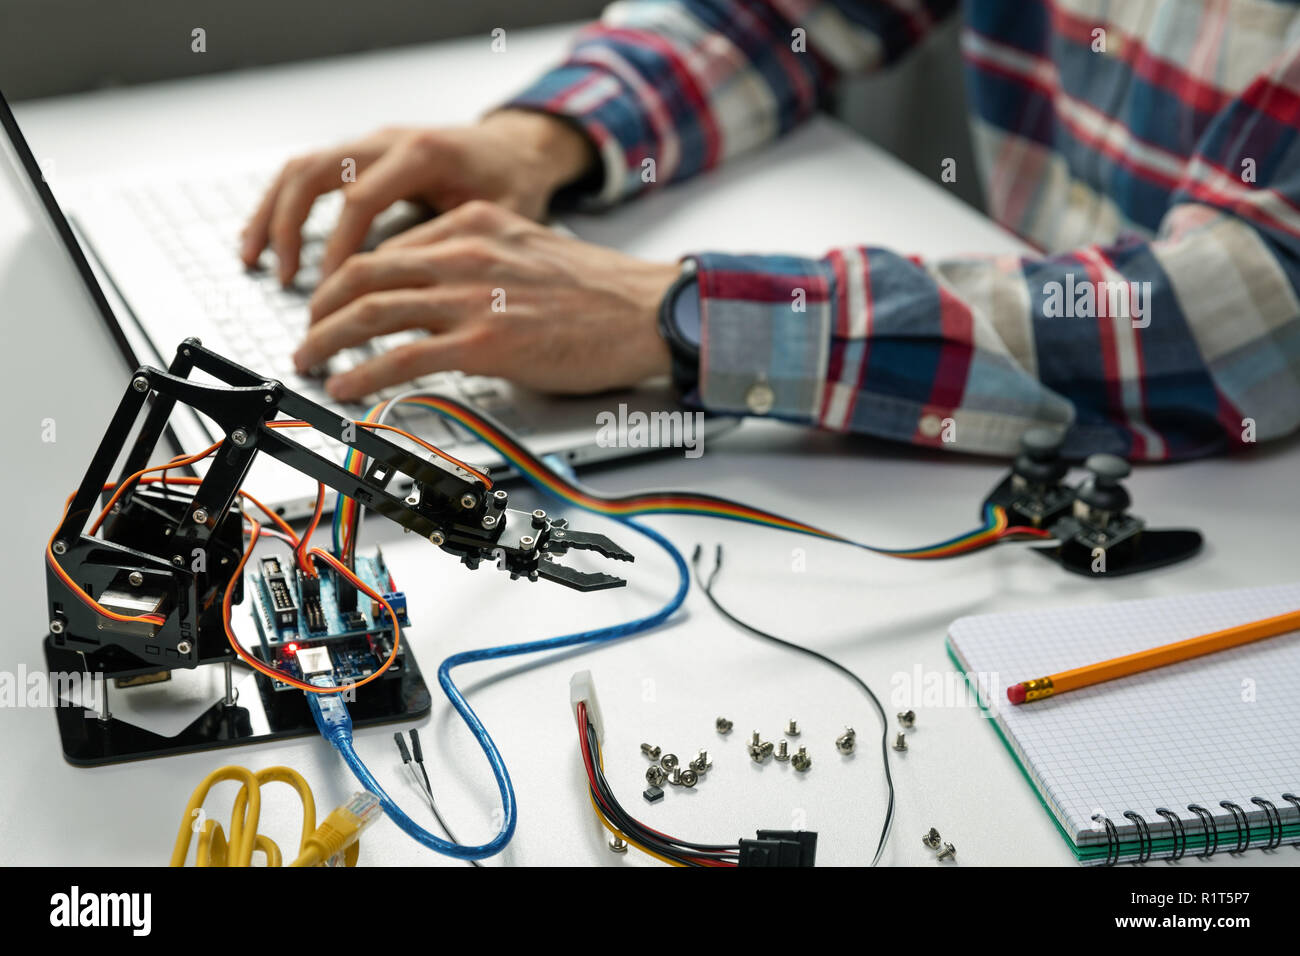 engineer working on robotics automation project Stock Photo